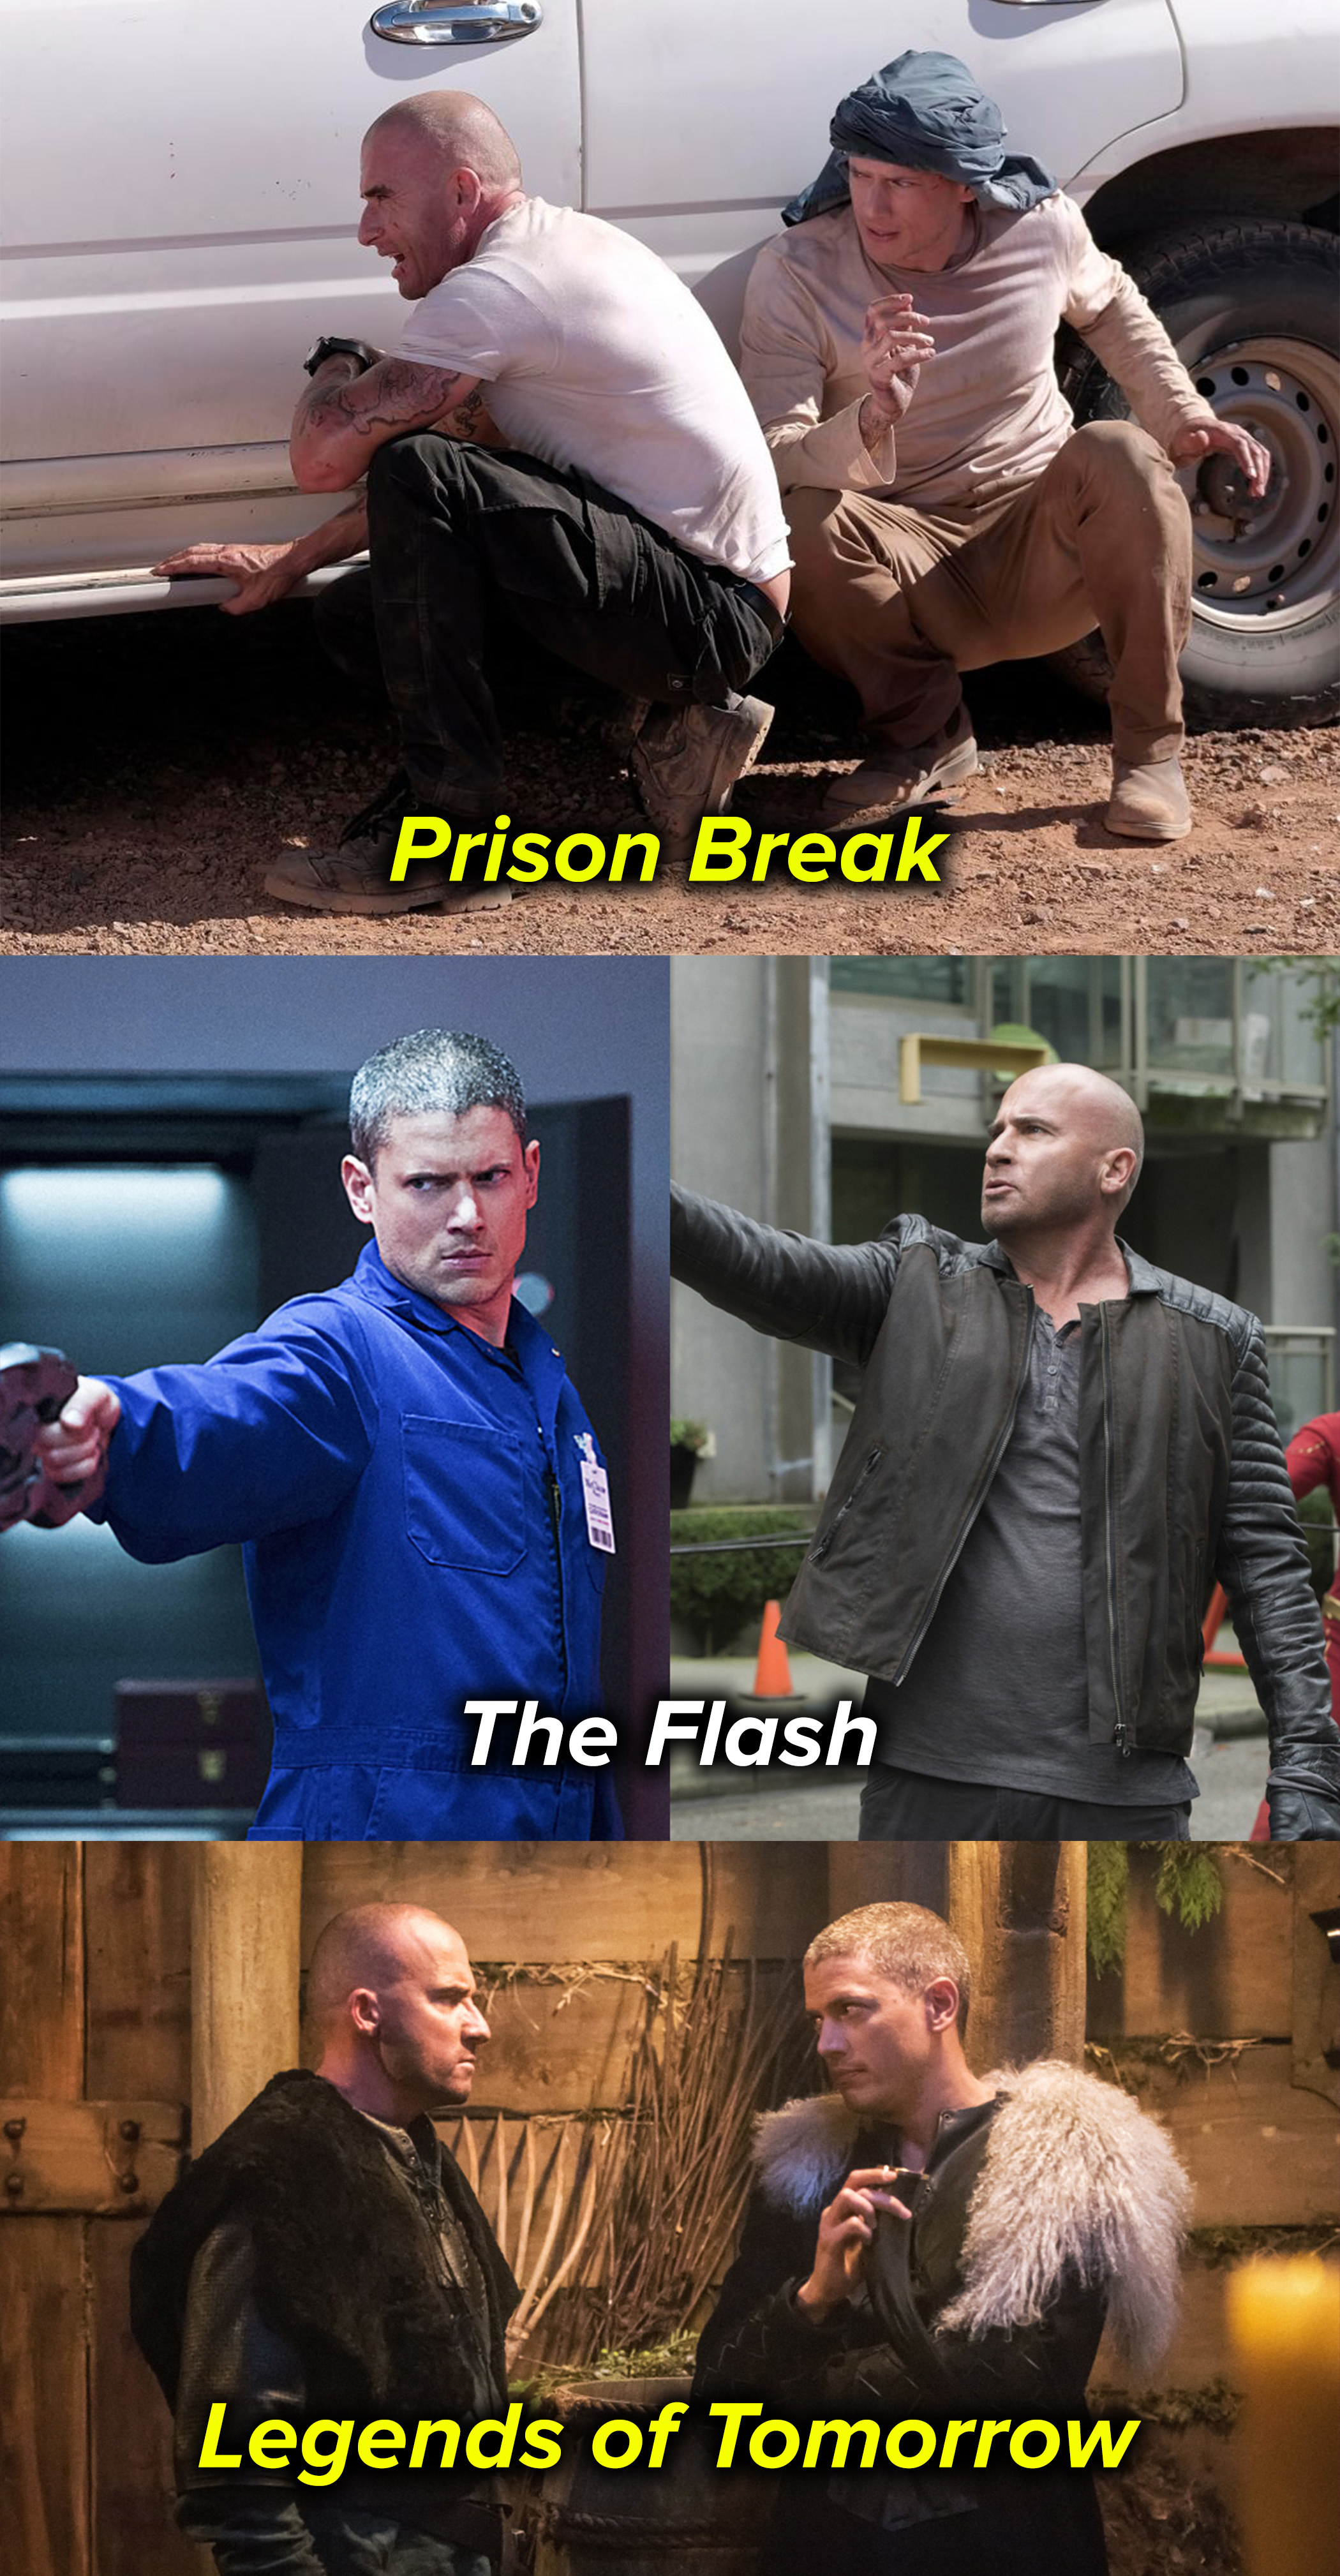 across all three shows, they play a pair of tough guys